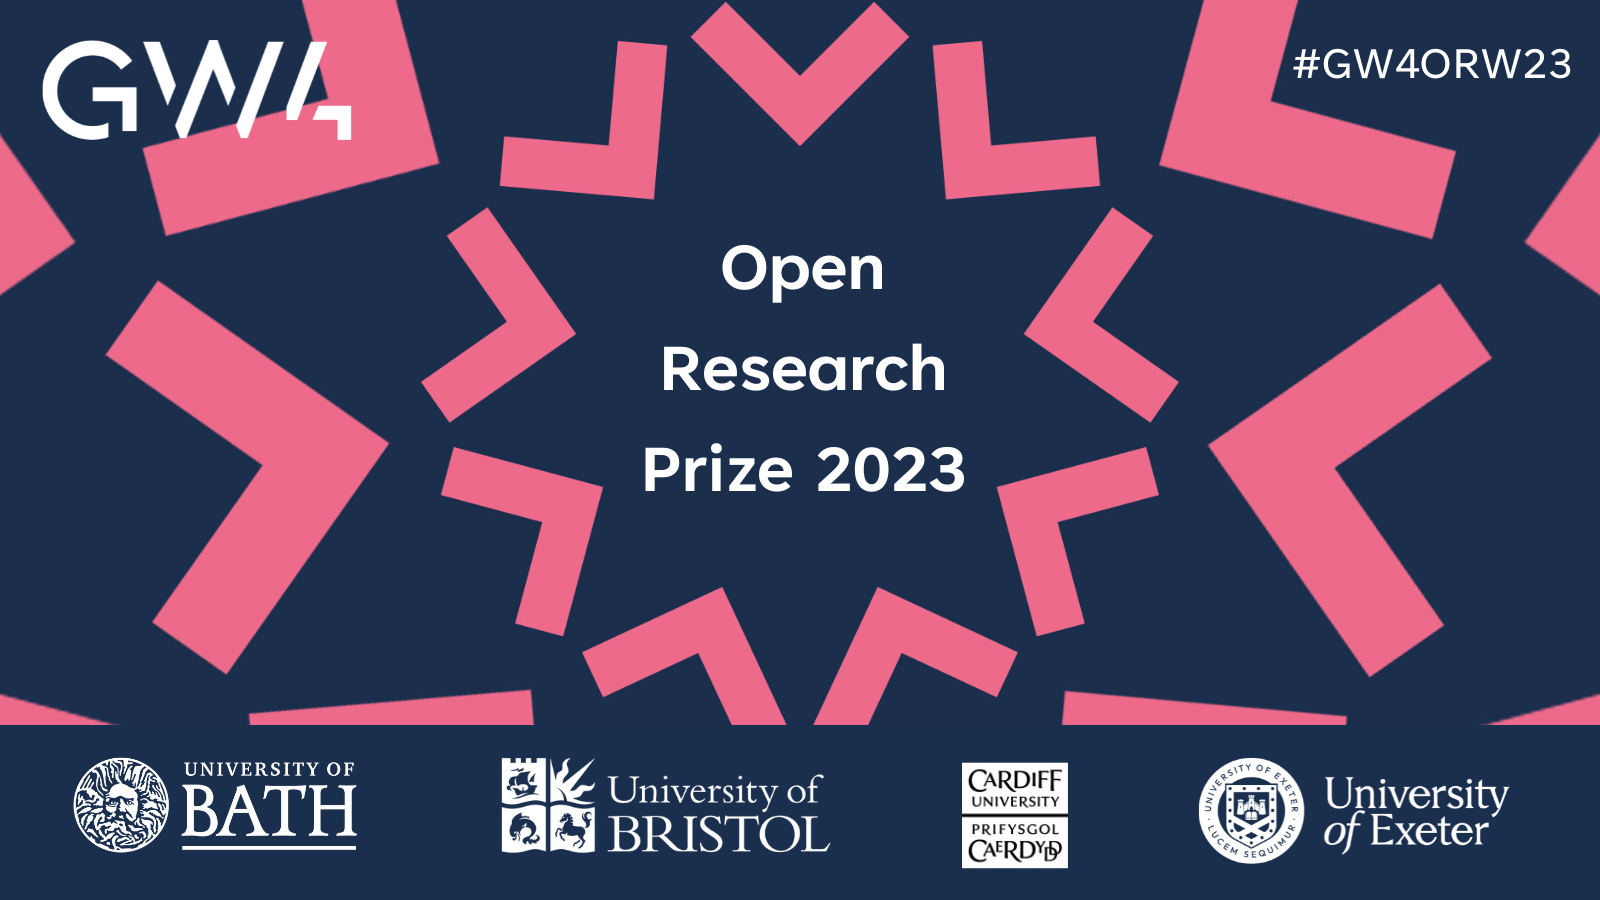 Graphic for Open Research Prize 2023